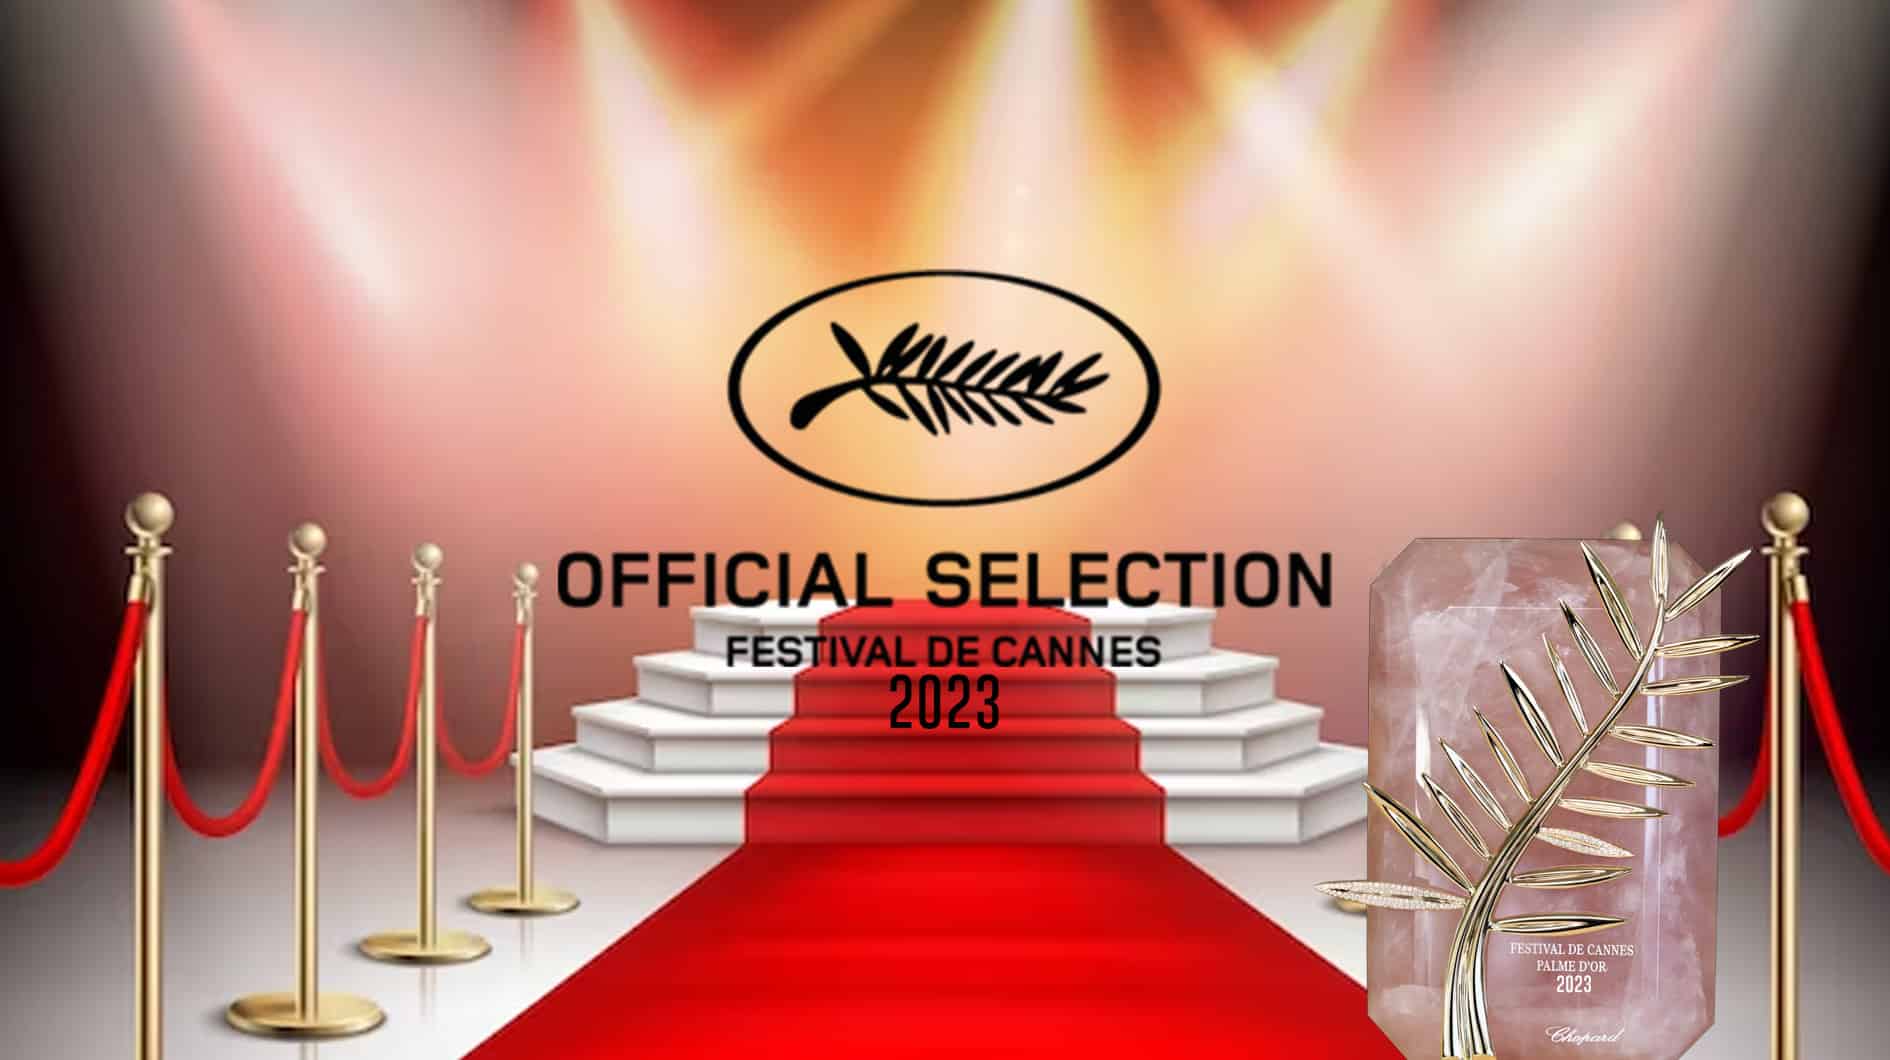 Cannes Film Festival The 6 most anticipated films from the lineup